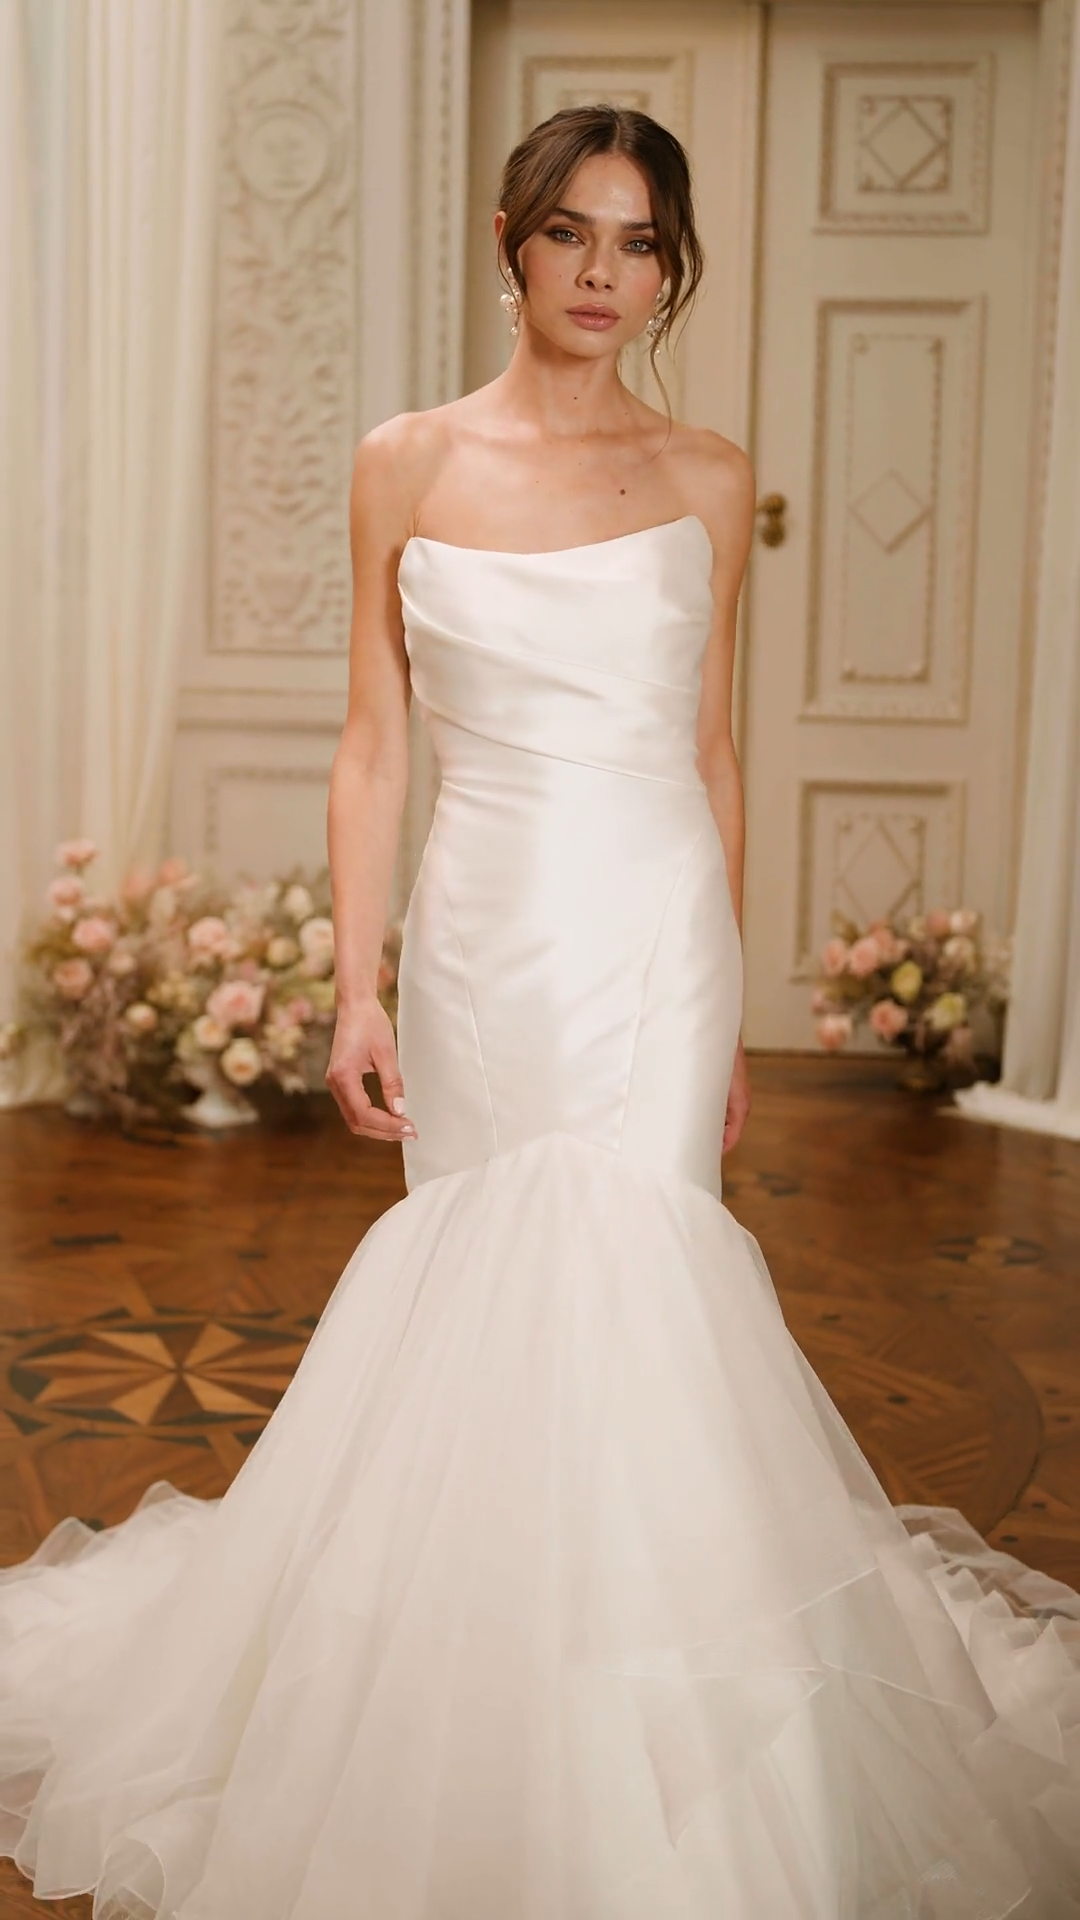 Moonlight Collection J6859 blush bridal gowns, ivory bridal gowns, white wedding dresses & more